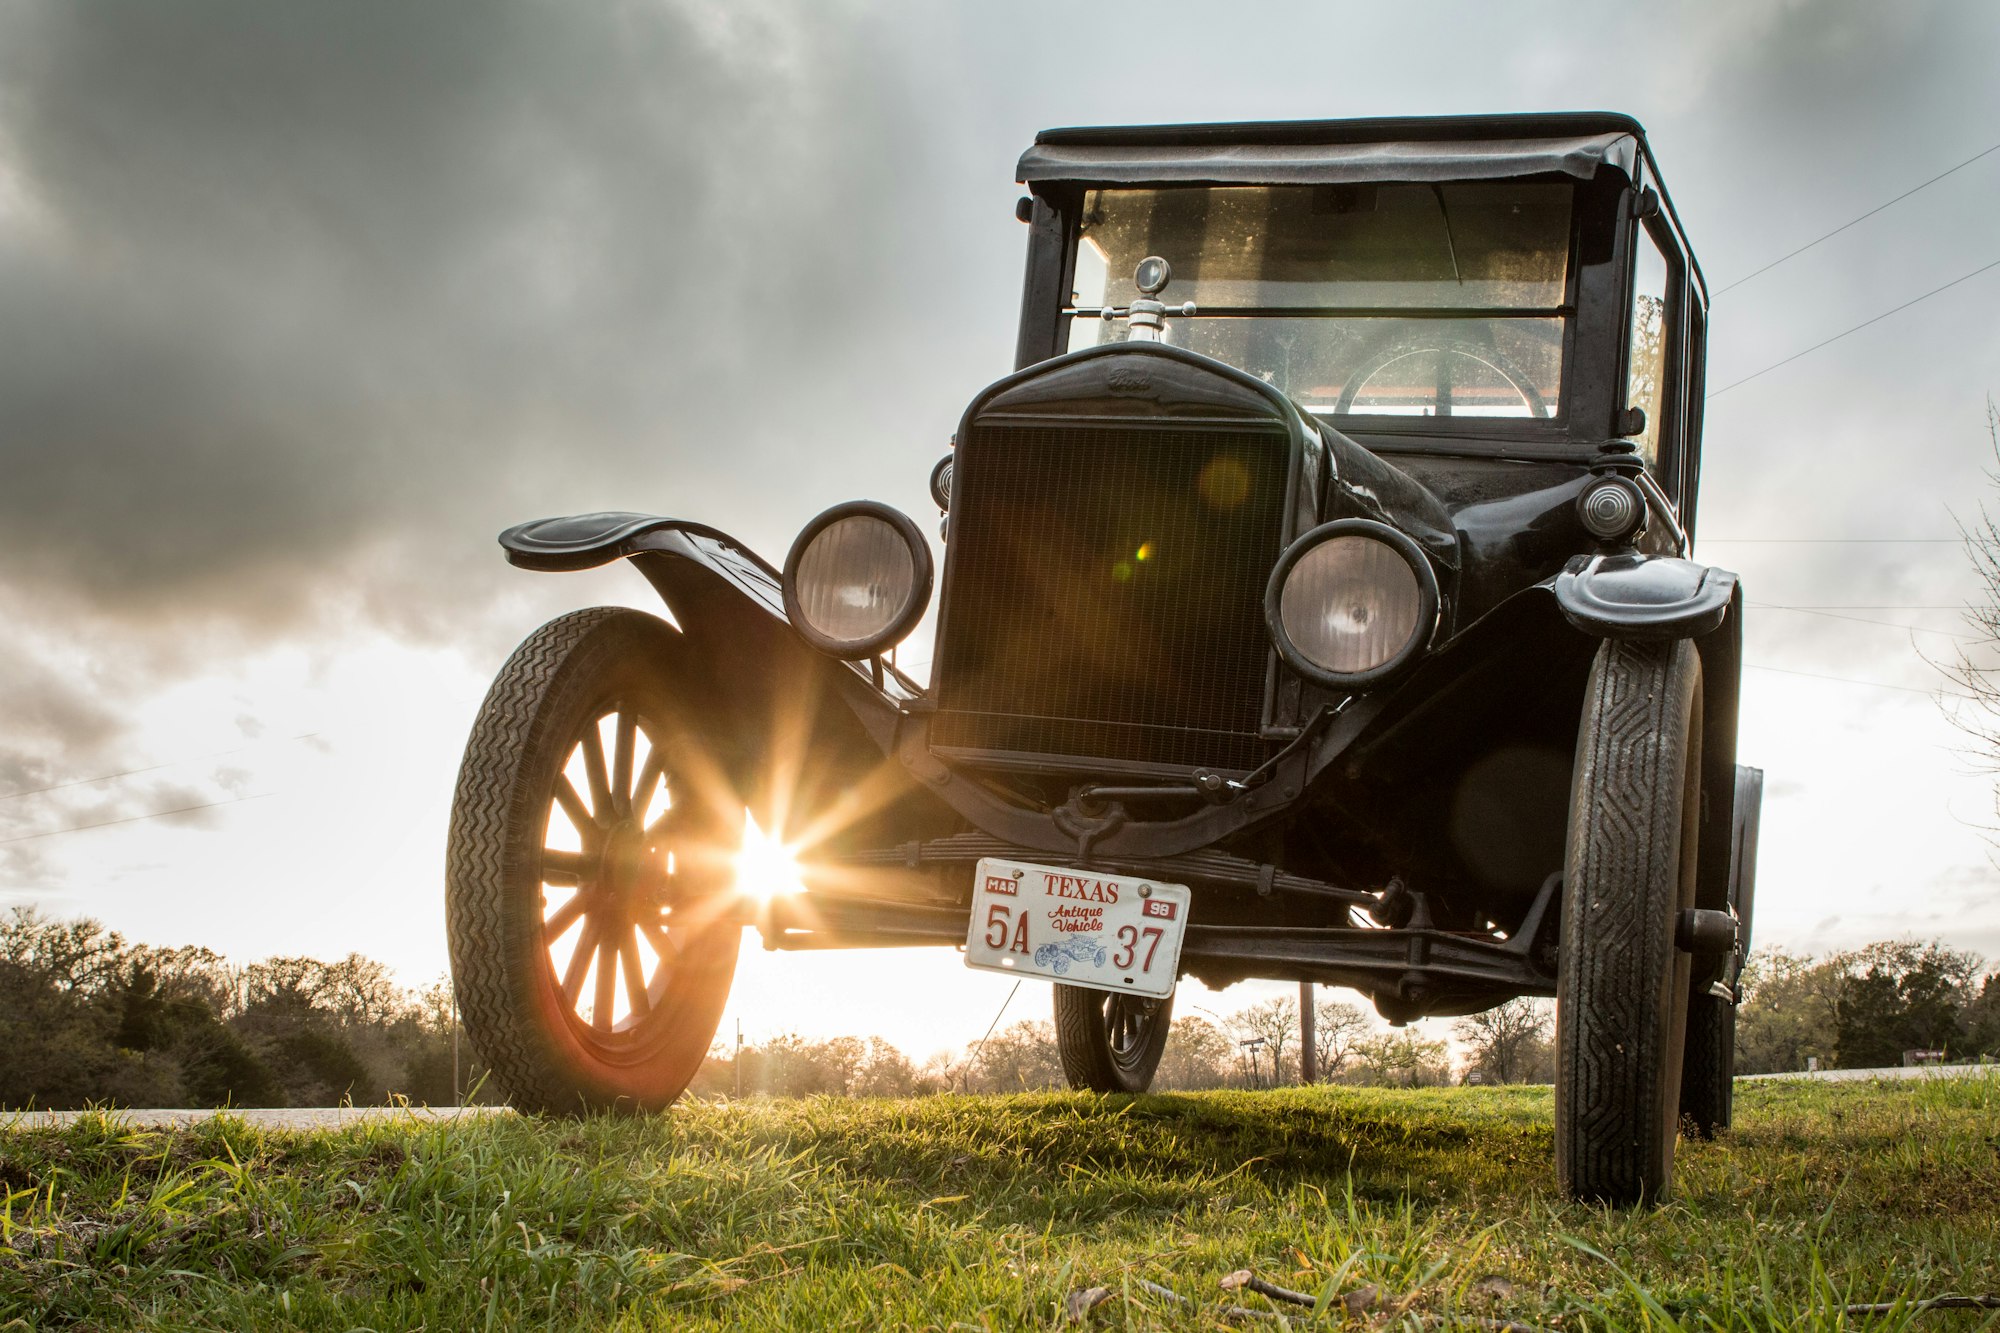 How Much Did A Model T Sell For When It Was Introduced In 1908?